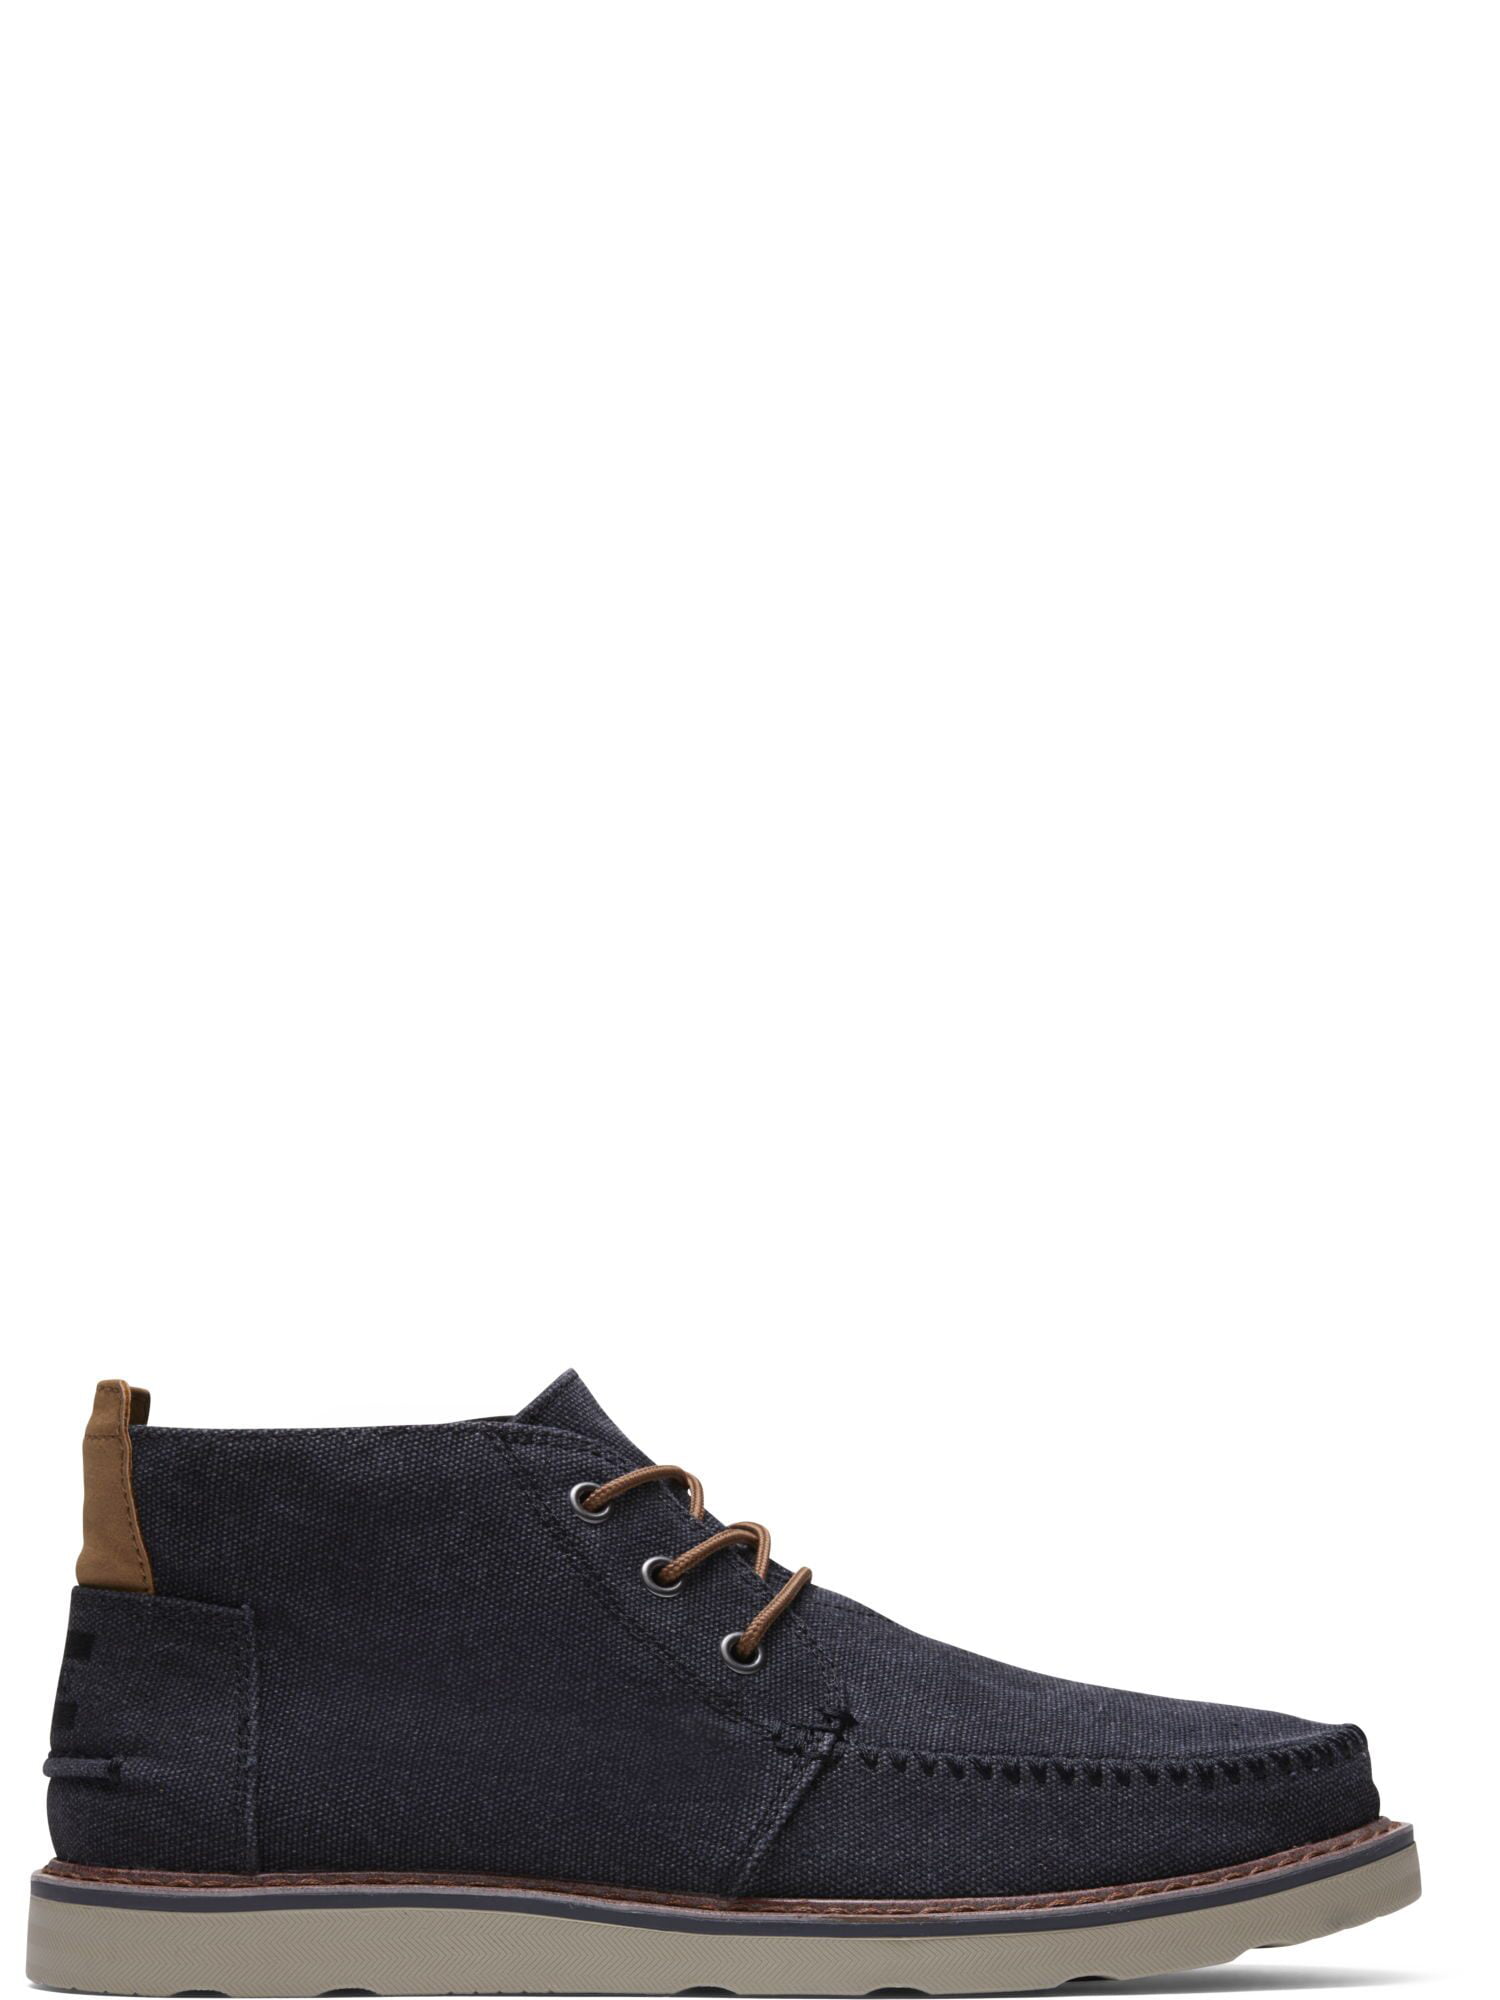 TOMS Men's Washed Canvas Chukka Boots 